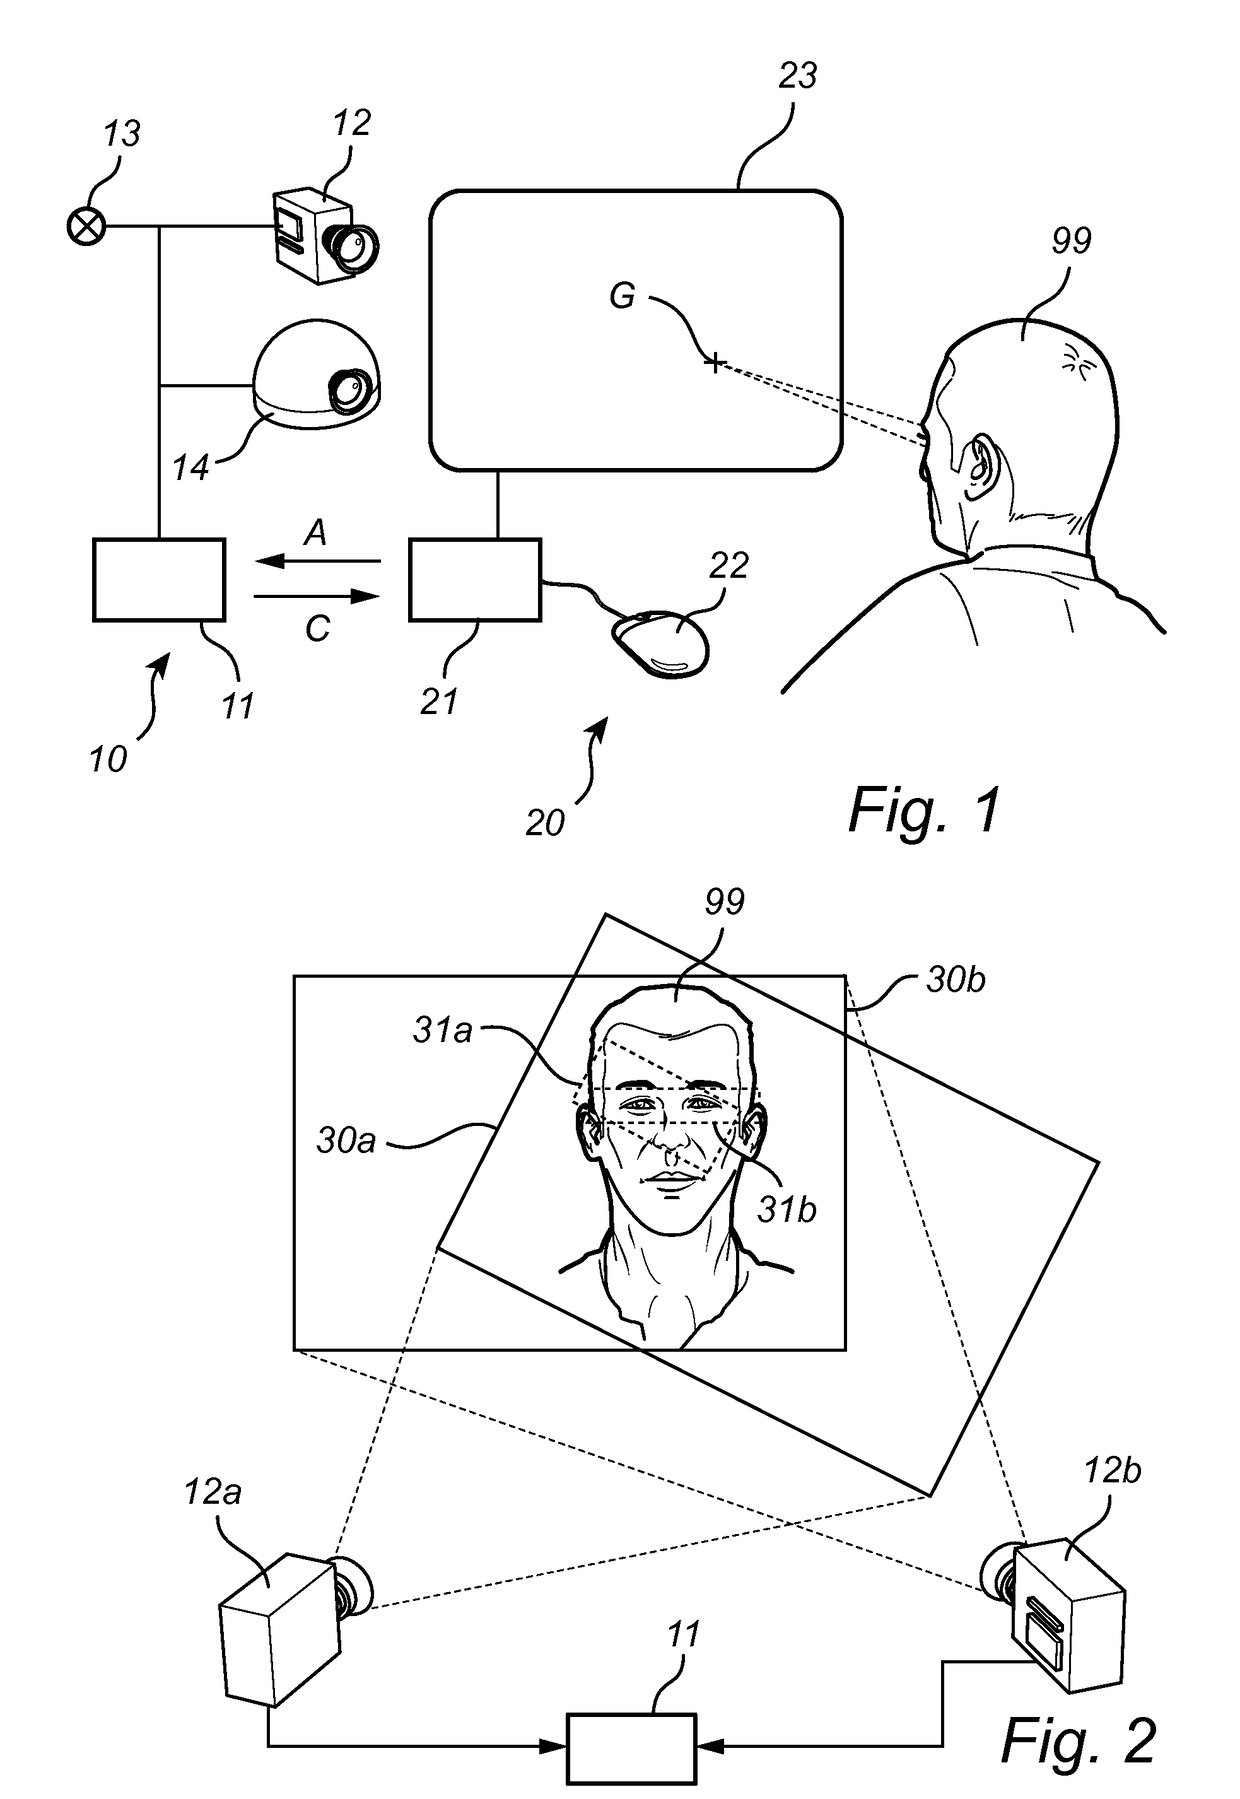 Fast wake-up in a gaze tracking system